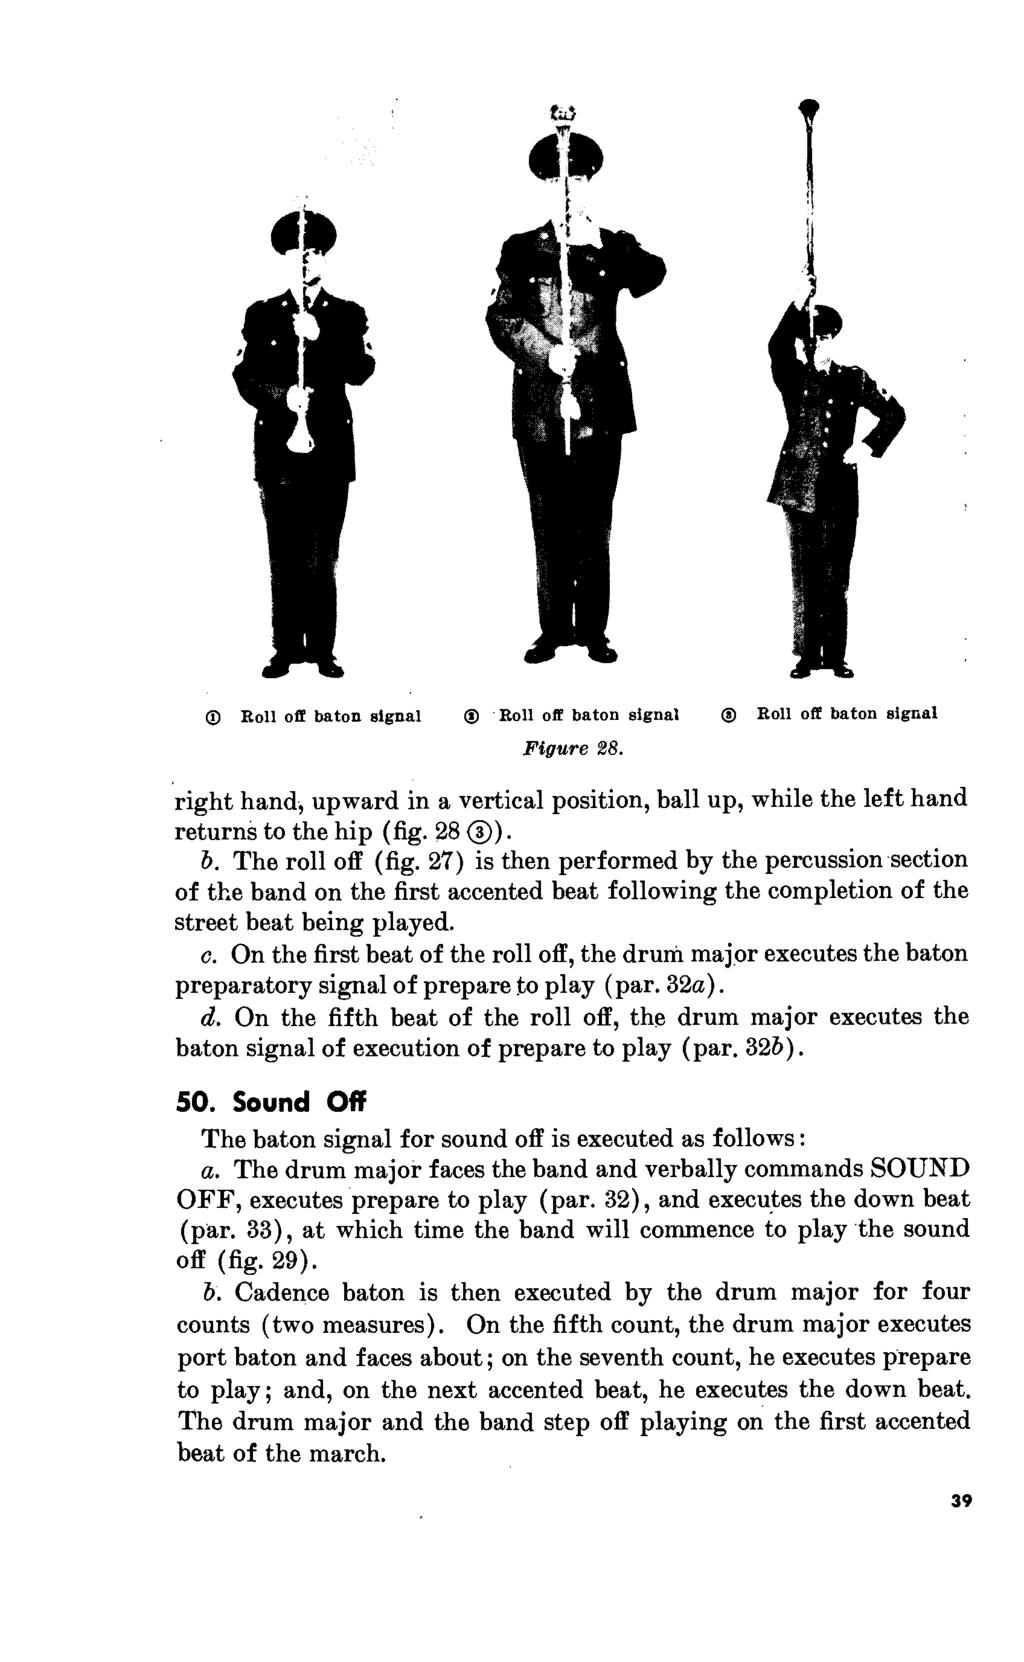 ( Roll off baton signal 0 Roll off baton signal Roll off baton signal Figure 28. right hand, upward in a vertical position, ball up, while the left hand returns to the hip (fig. 28 0). b. The roll off (fig.